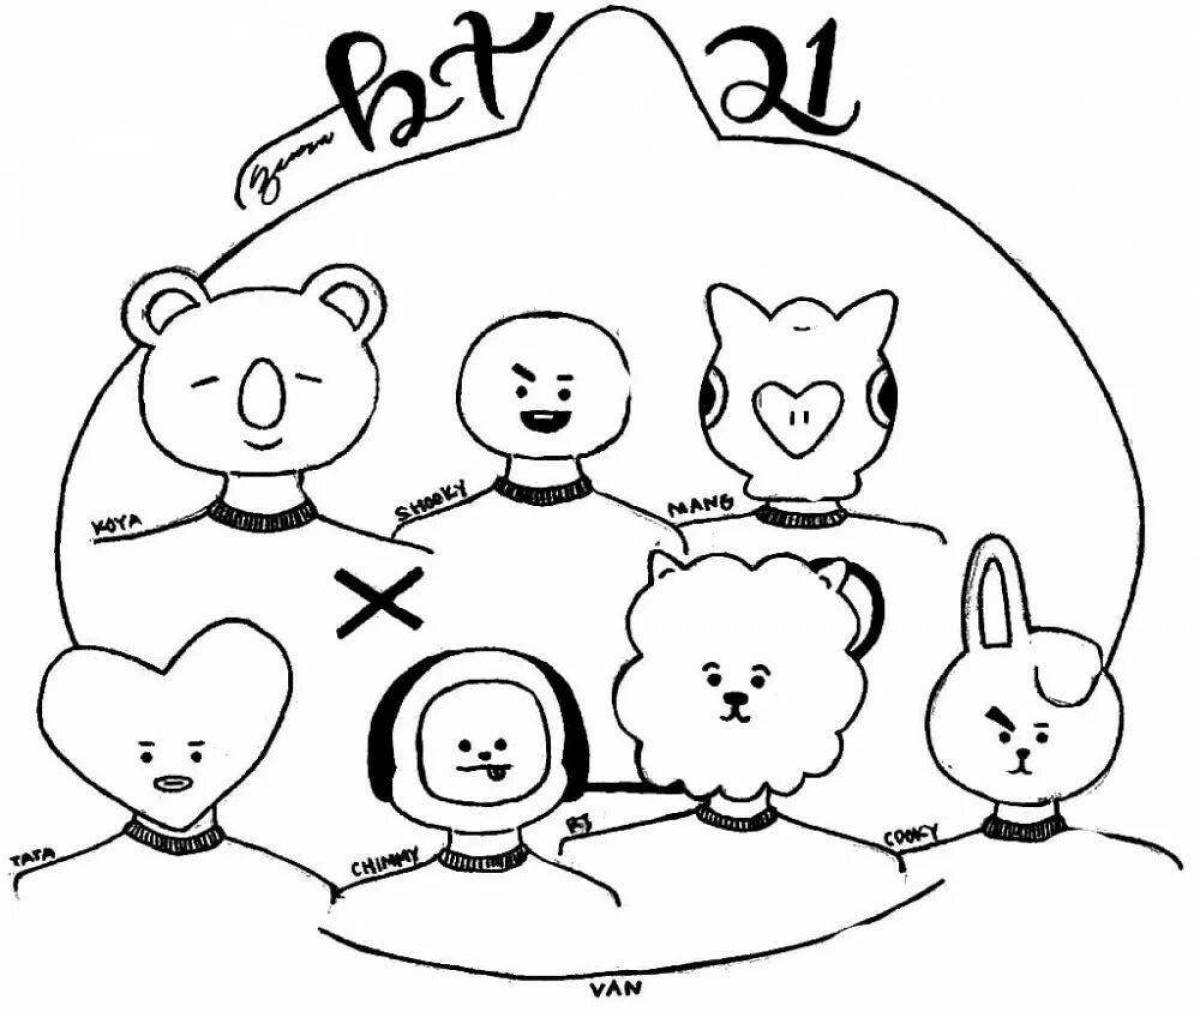 Bright coloring page bt 21